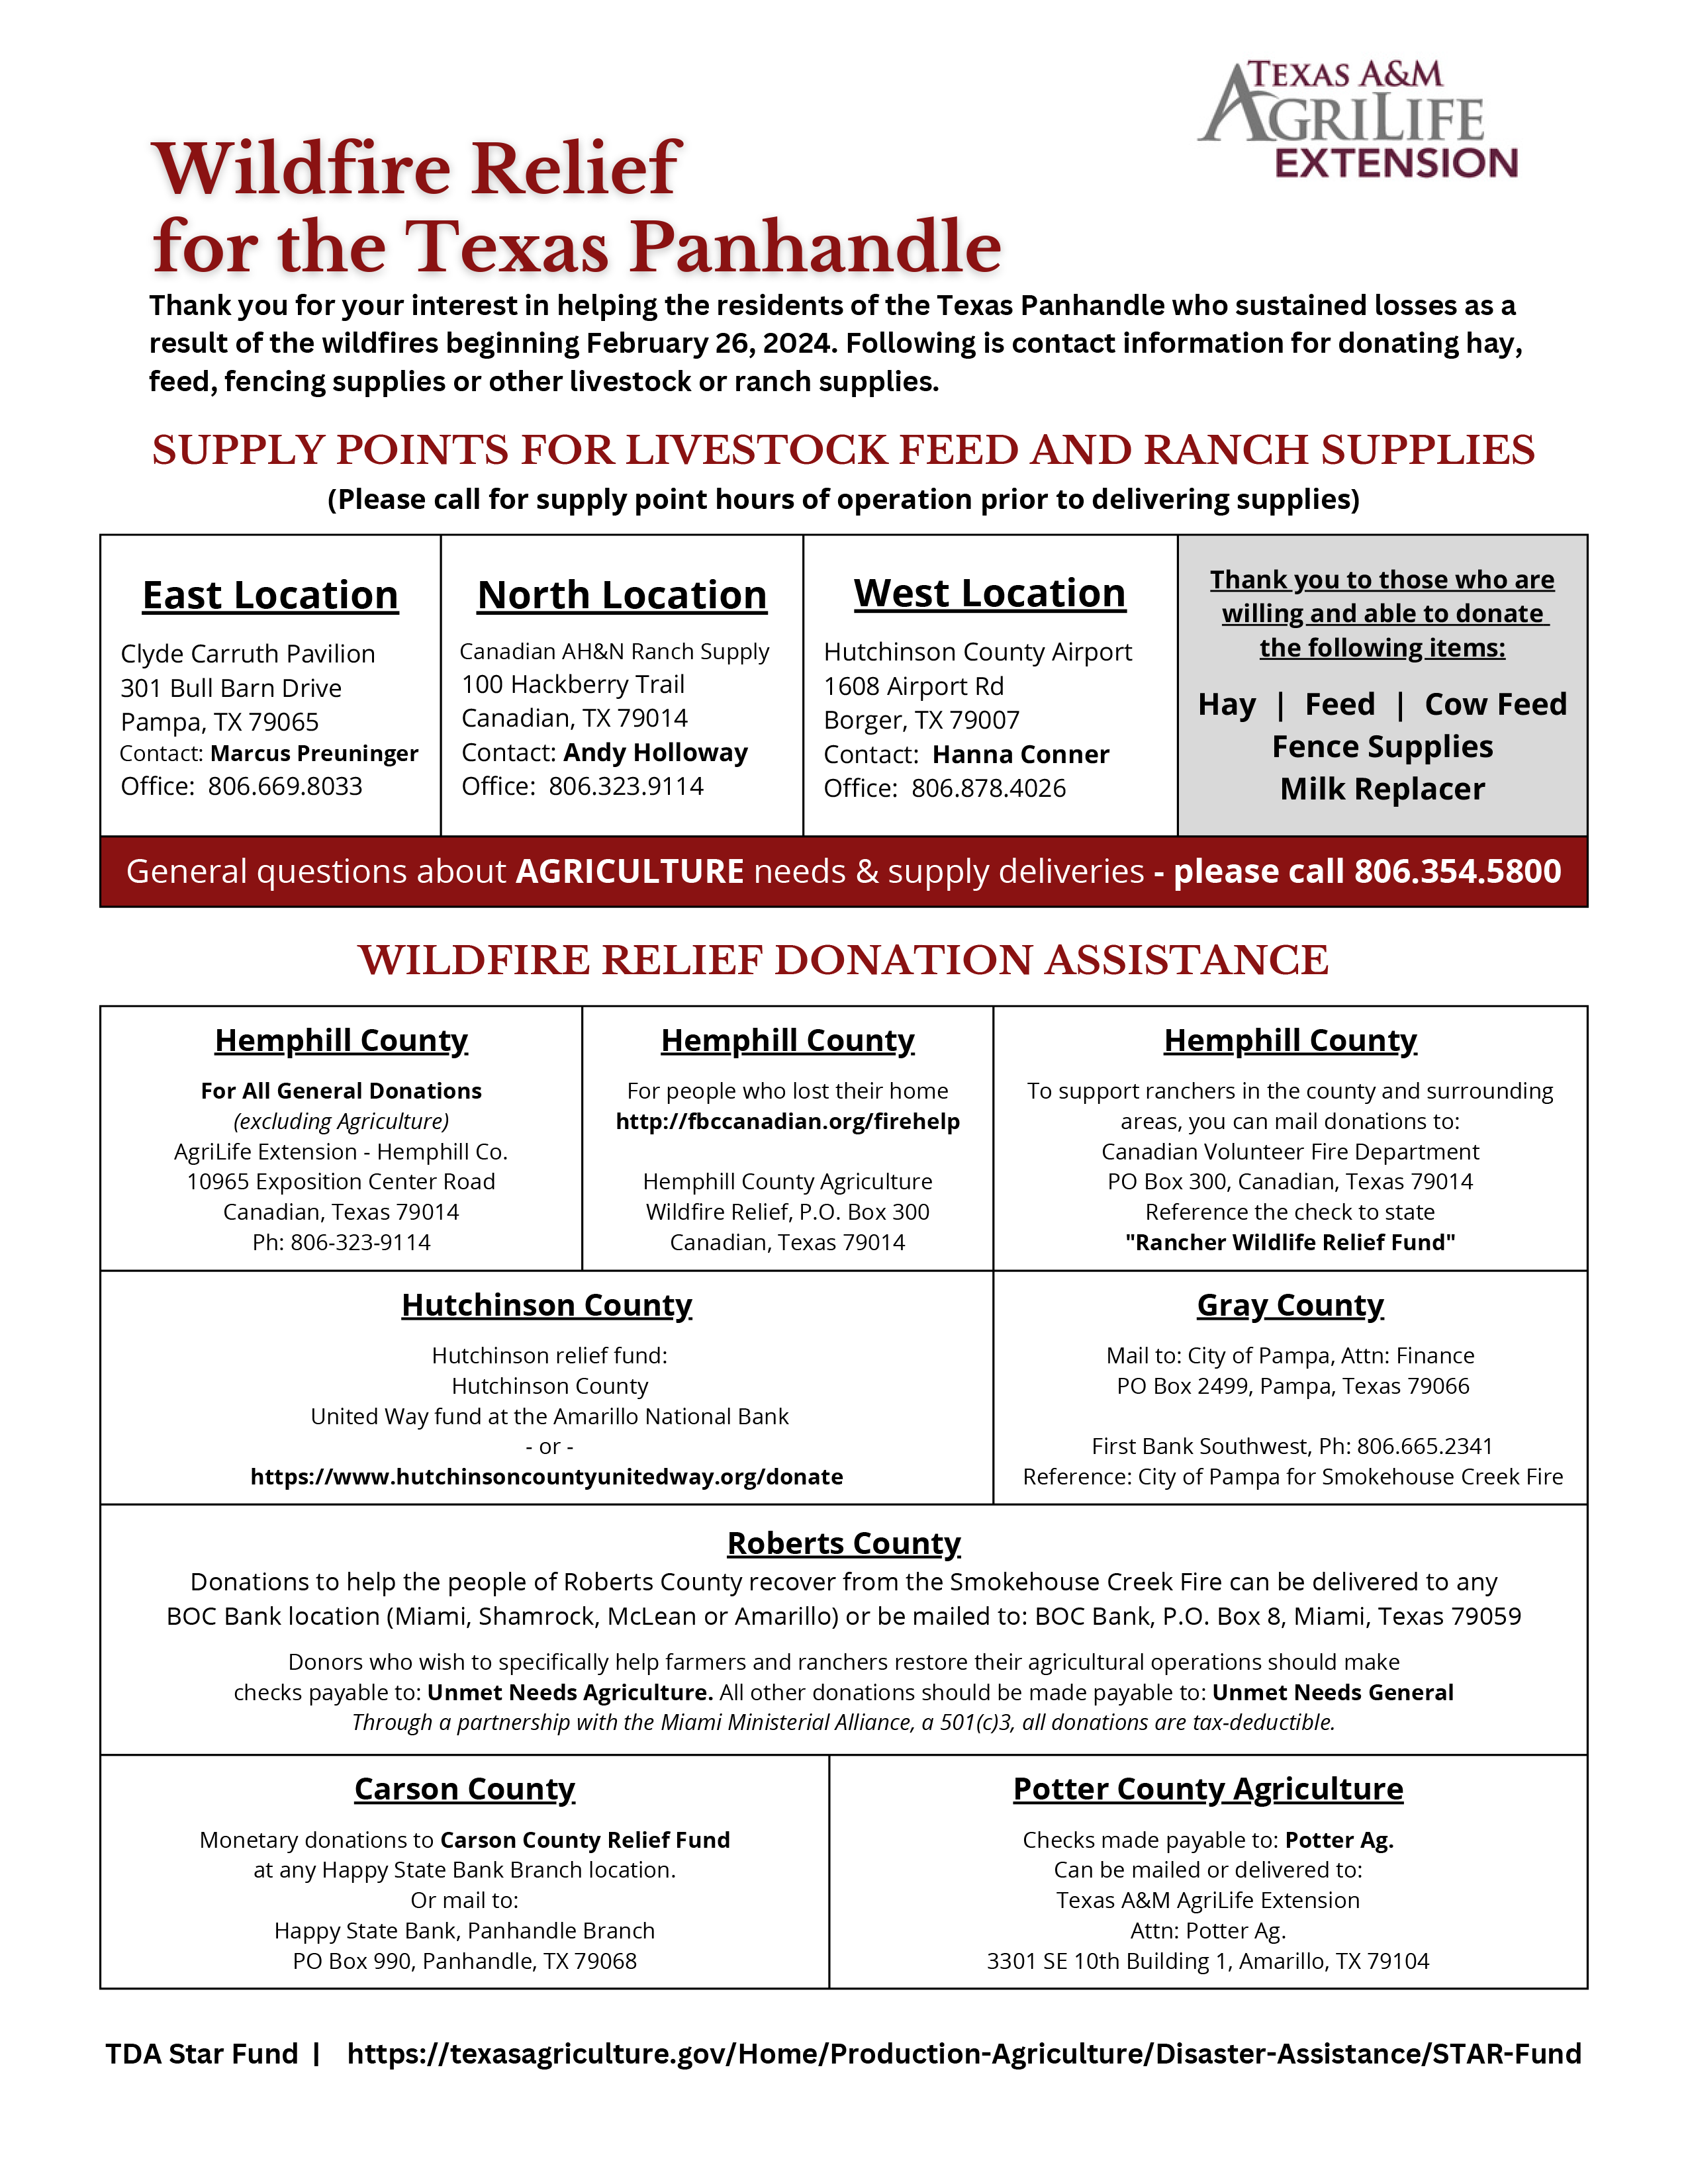 TAMU Wildfire Relief information for the Texas Panhandle.